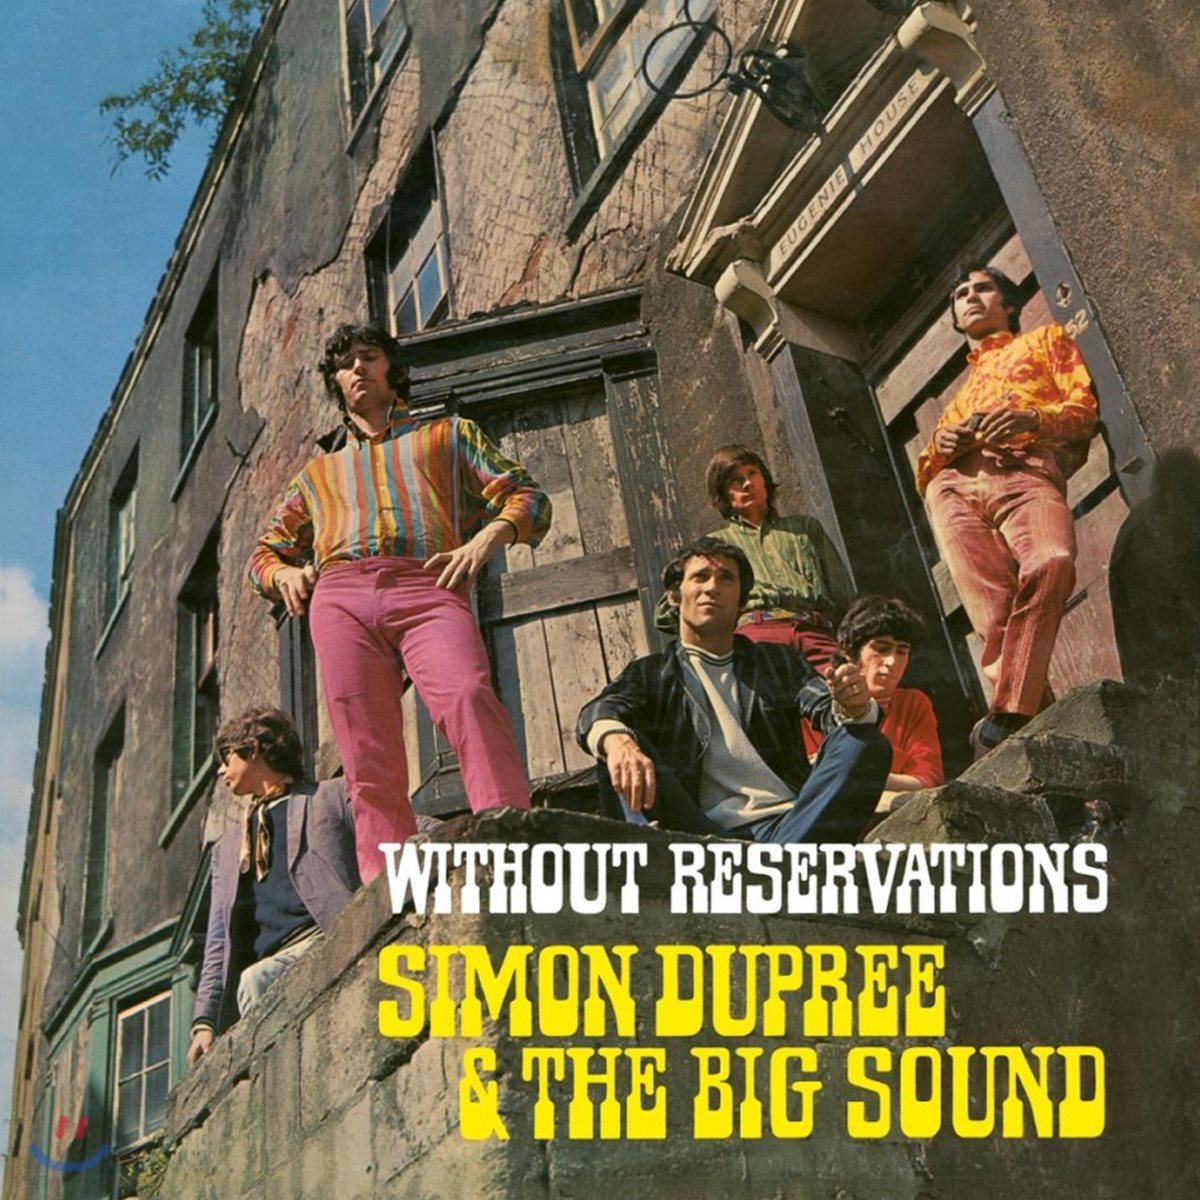 Simon Dupree & The Big Sound (사이먼 듀프리 앤 더 빅 사운드) - Without Reservations [LP]